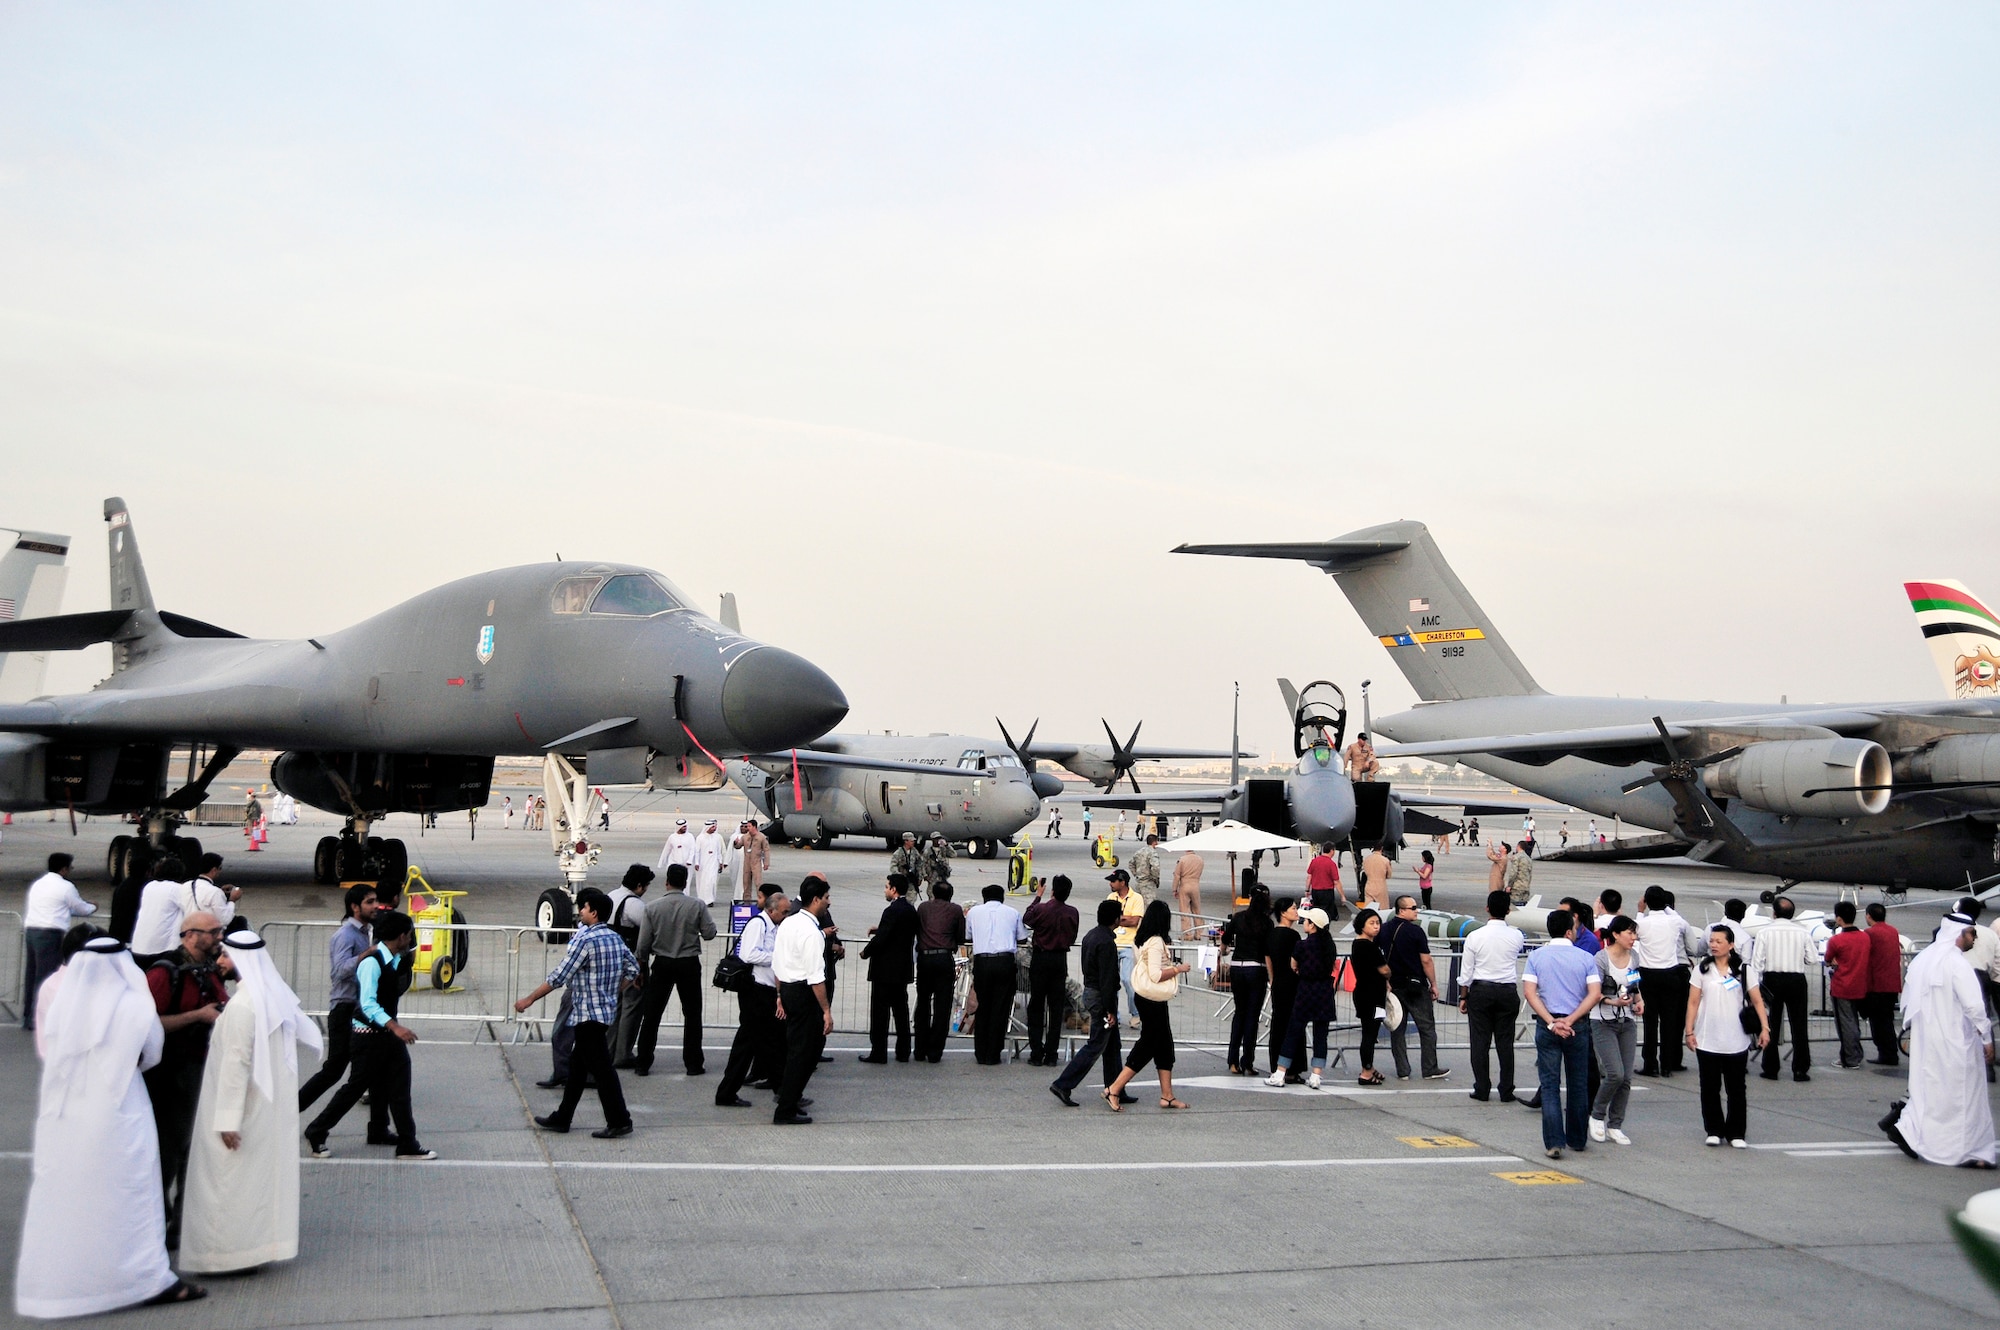 Crowds gather at Department of Defense static display aircraft Nov. 15, 2009 during the Dubai Air Show in the United Arab Emirates. The air show was held at the Dubai International Airport Expo and featured aircraft such as the B-1B Lancer, C-17 Globemaster III, F-15E Strike Eagle and the C-130J Hercules. (U.S. Air Force photo/Tech. Sgt. Charles Larkin Sr.)